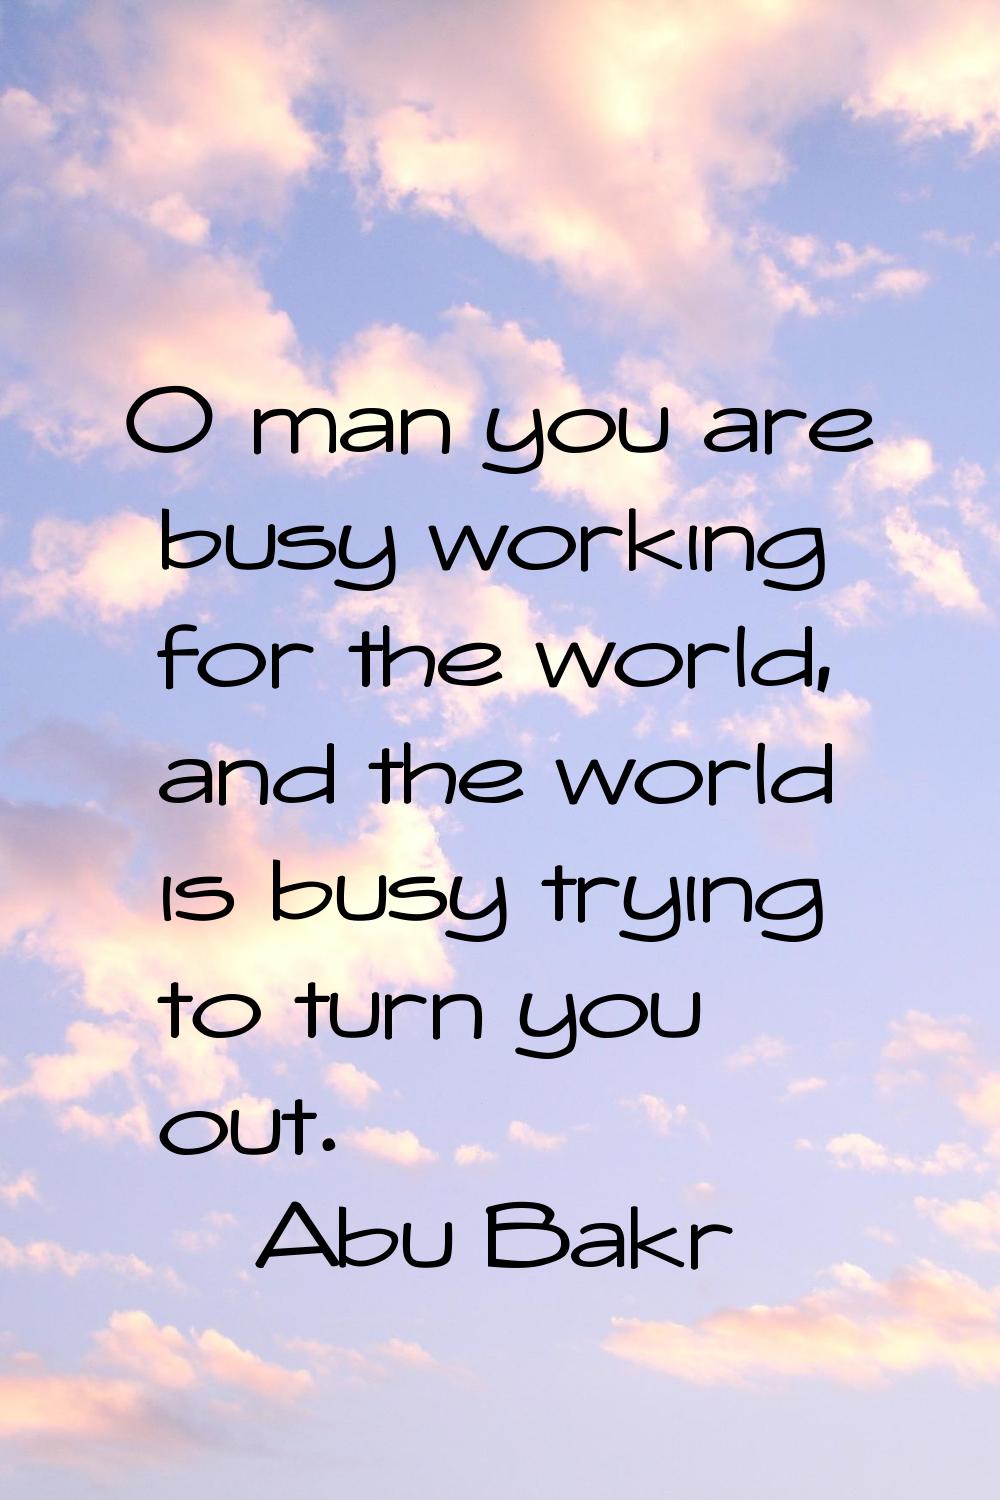 O man you are busy working for the world, and the world is busy trying to turn you out.